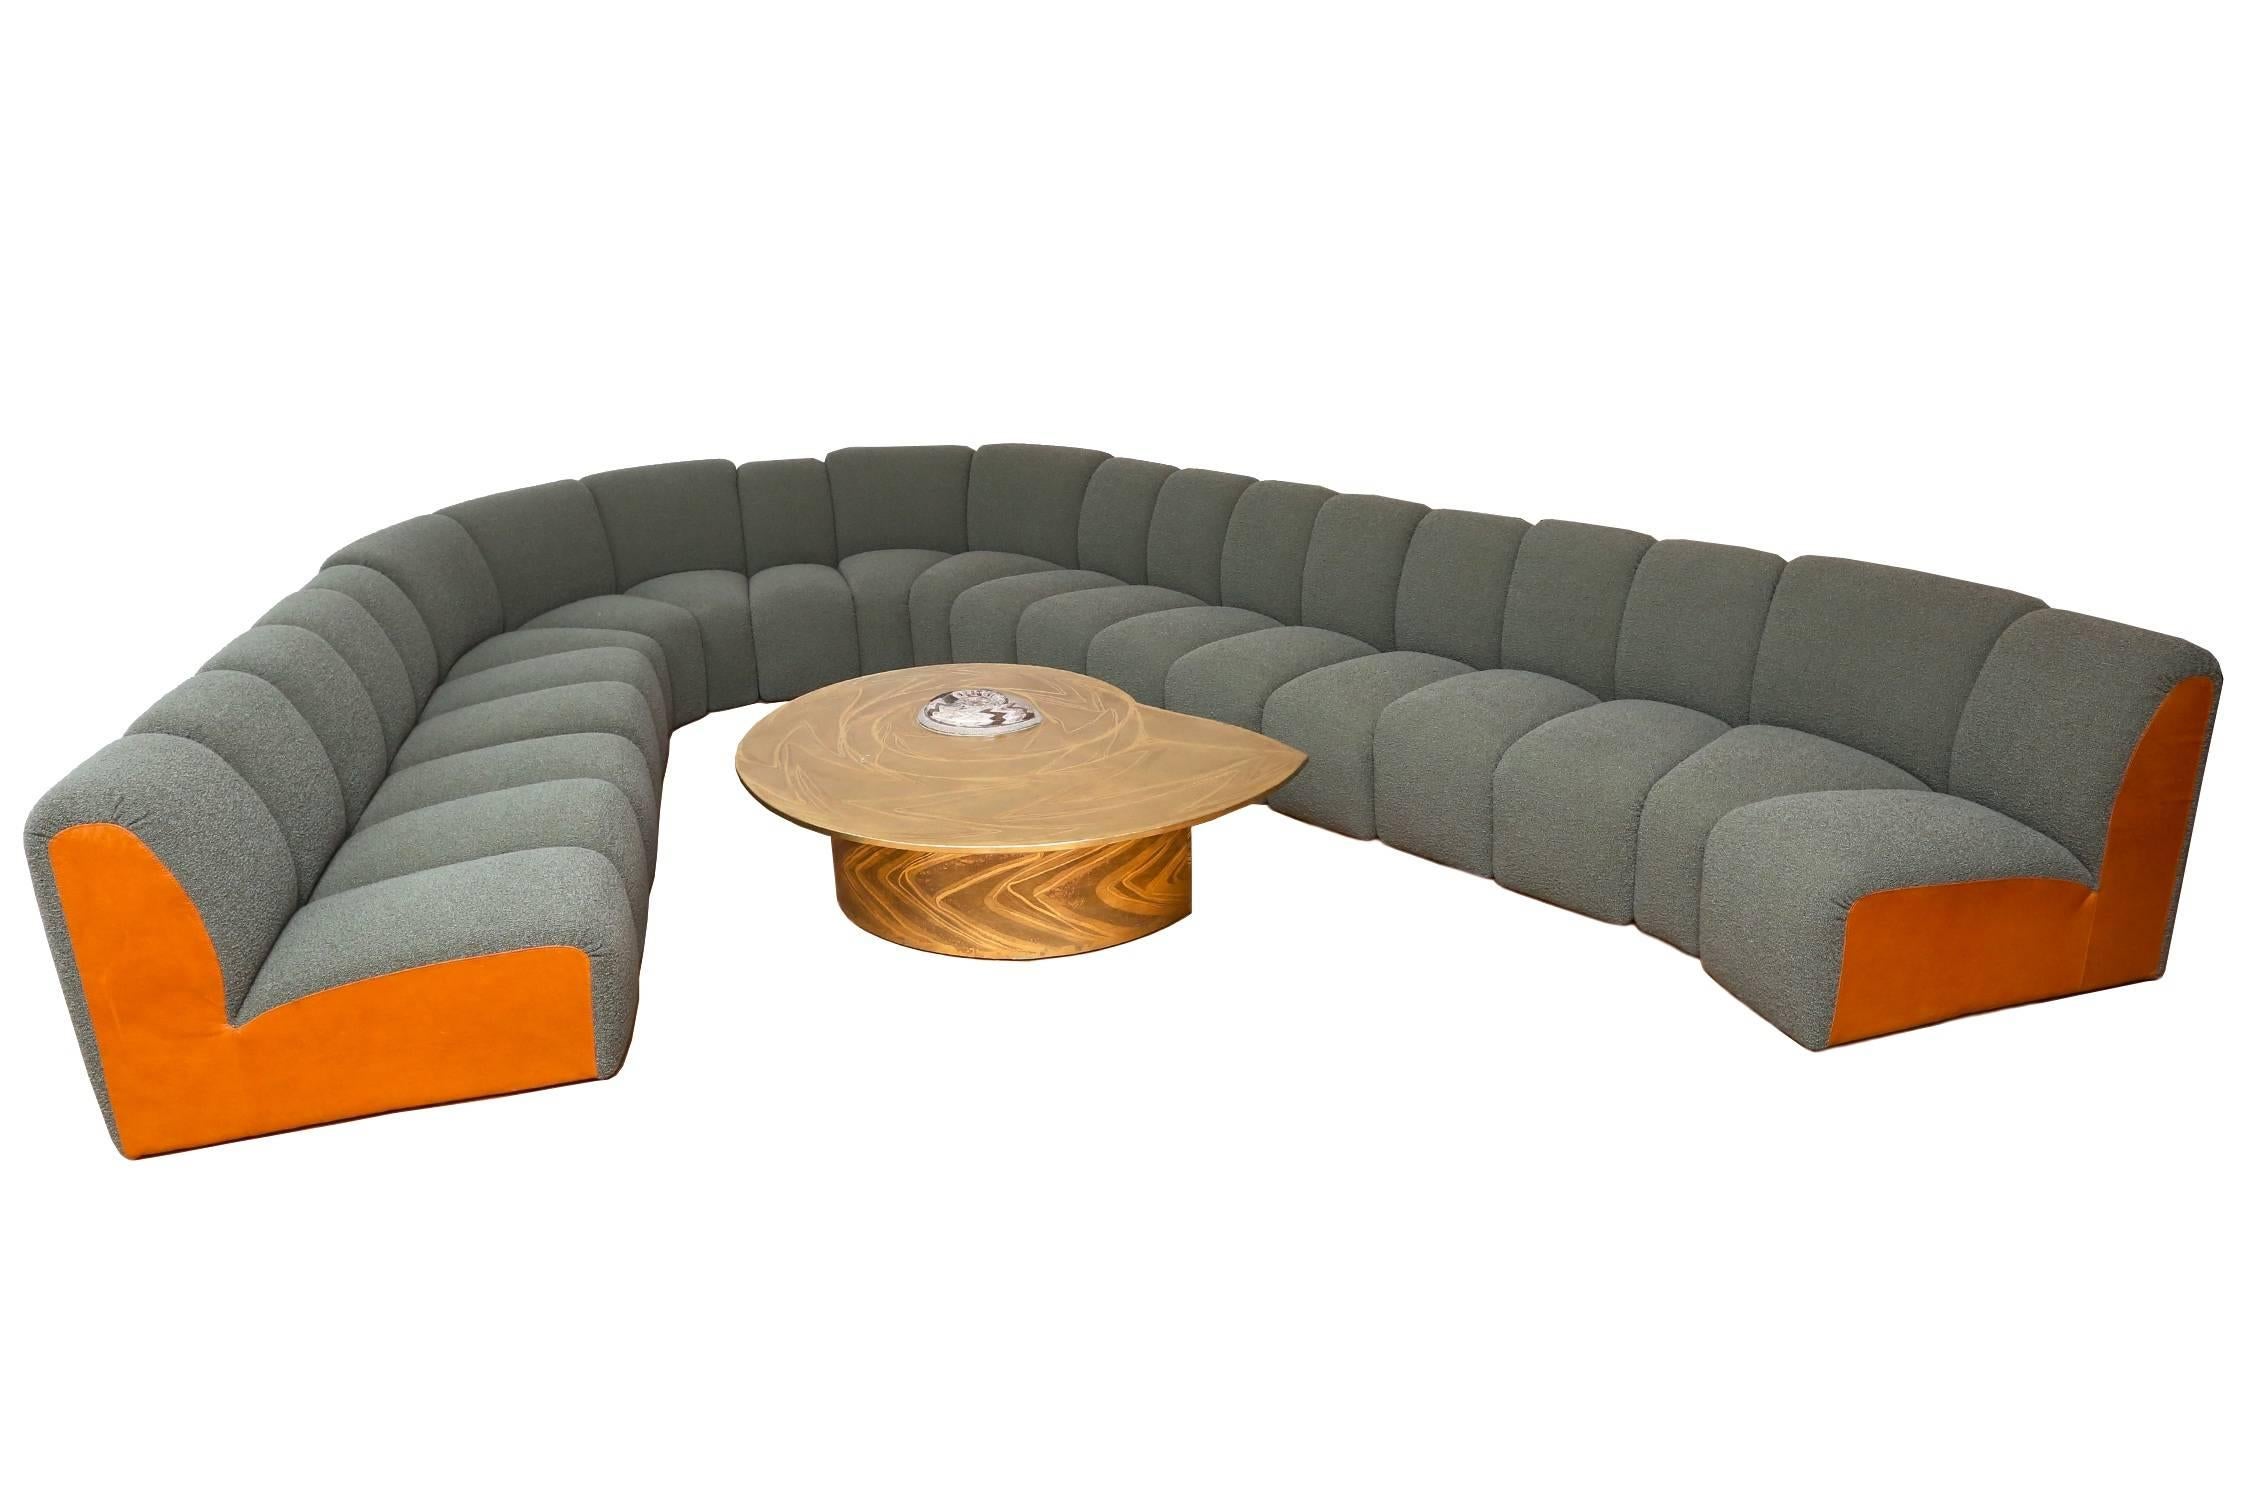 Modular 20 element sectional sofa
newly upholstered Hallingdal fabric
cognac leather sides.
Mississippi by Pierre Paulin for Artifort,
the Netherlands, 1978.
The depth of the sofa is 80 cm, height backrest 65 cm, seat height 36 cm , length +/-